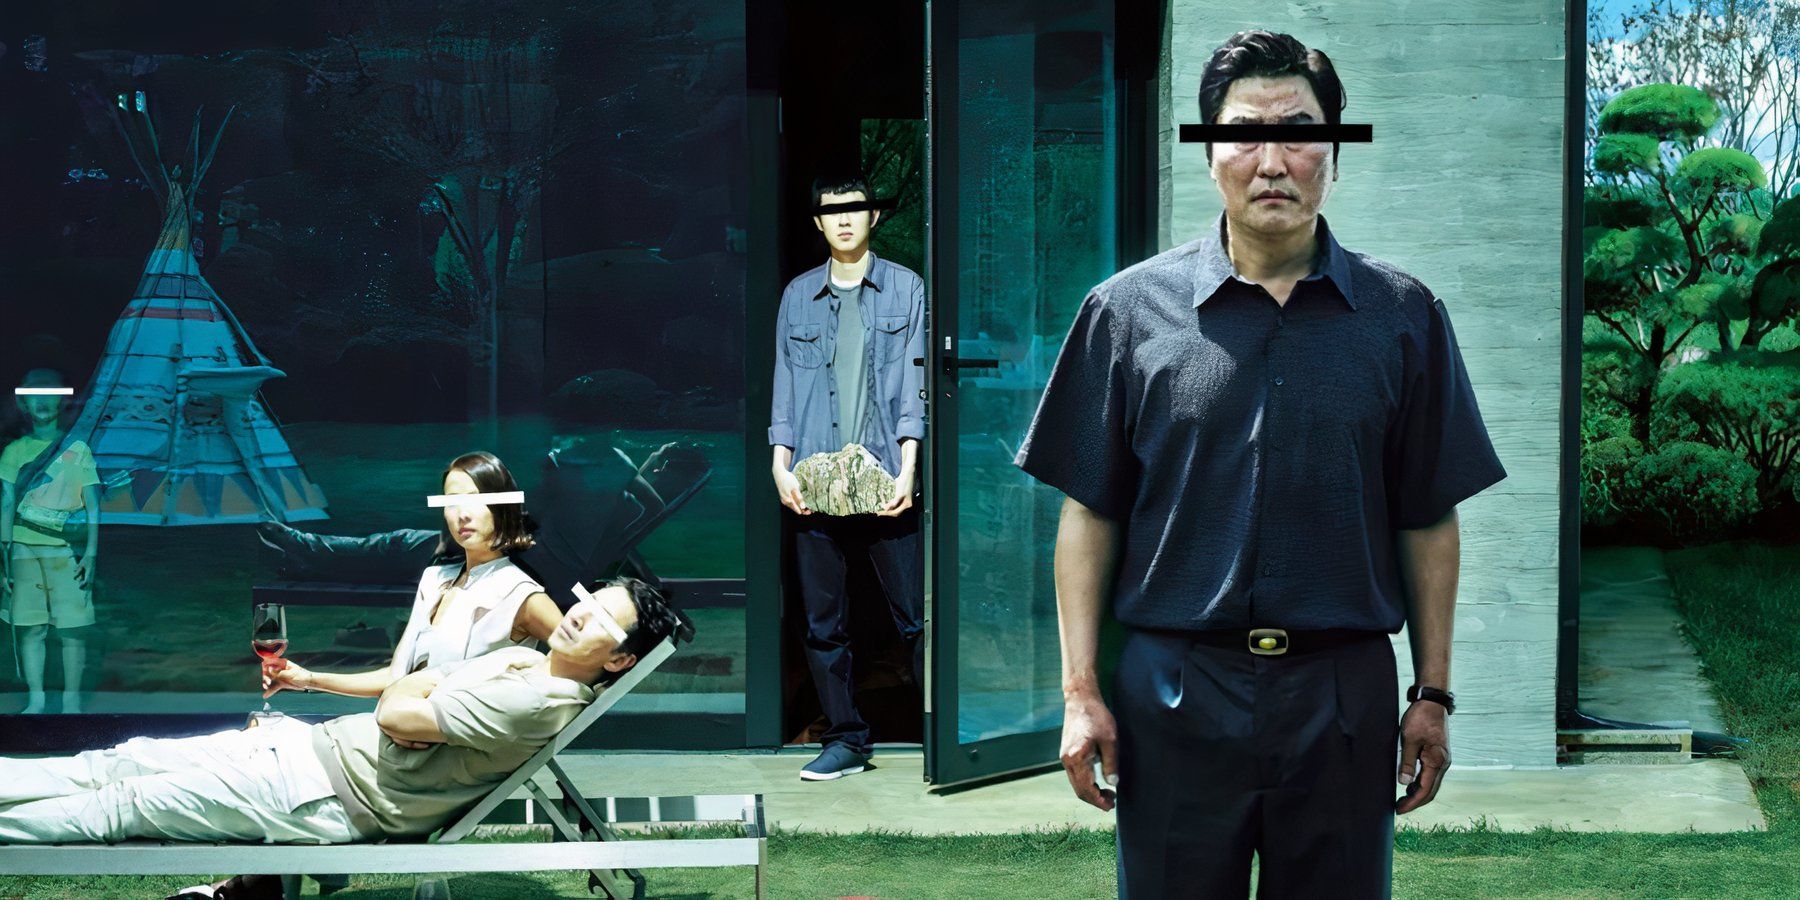 The Kim family lounges about in the backyard of the house of the Park family in a cropped closeup from the poster for Parasite. There is a sinister redacted line superimposed over every person’s eyes.